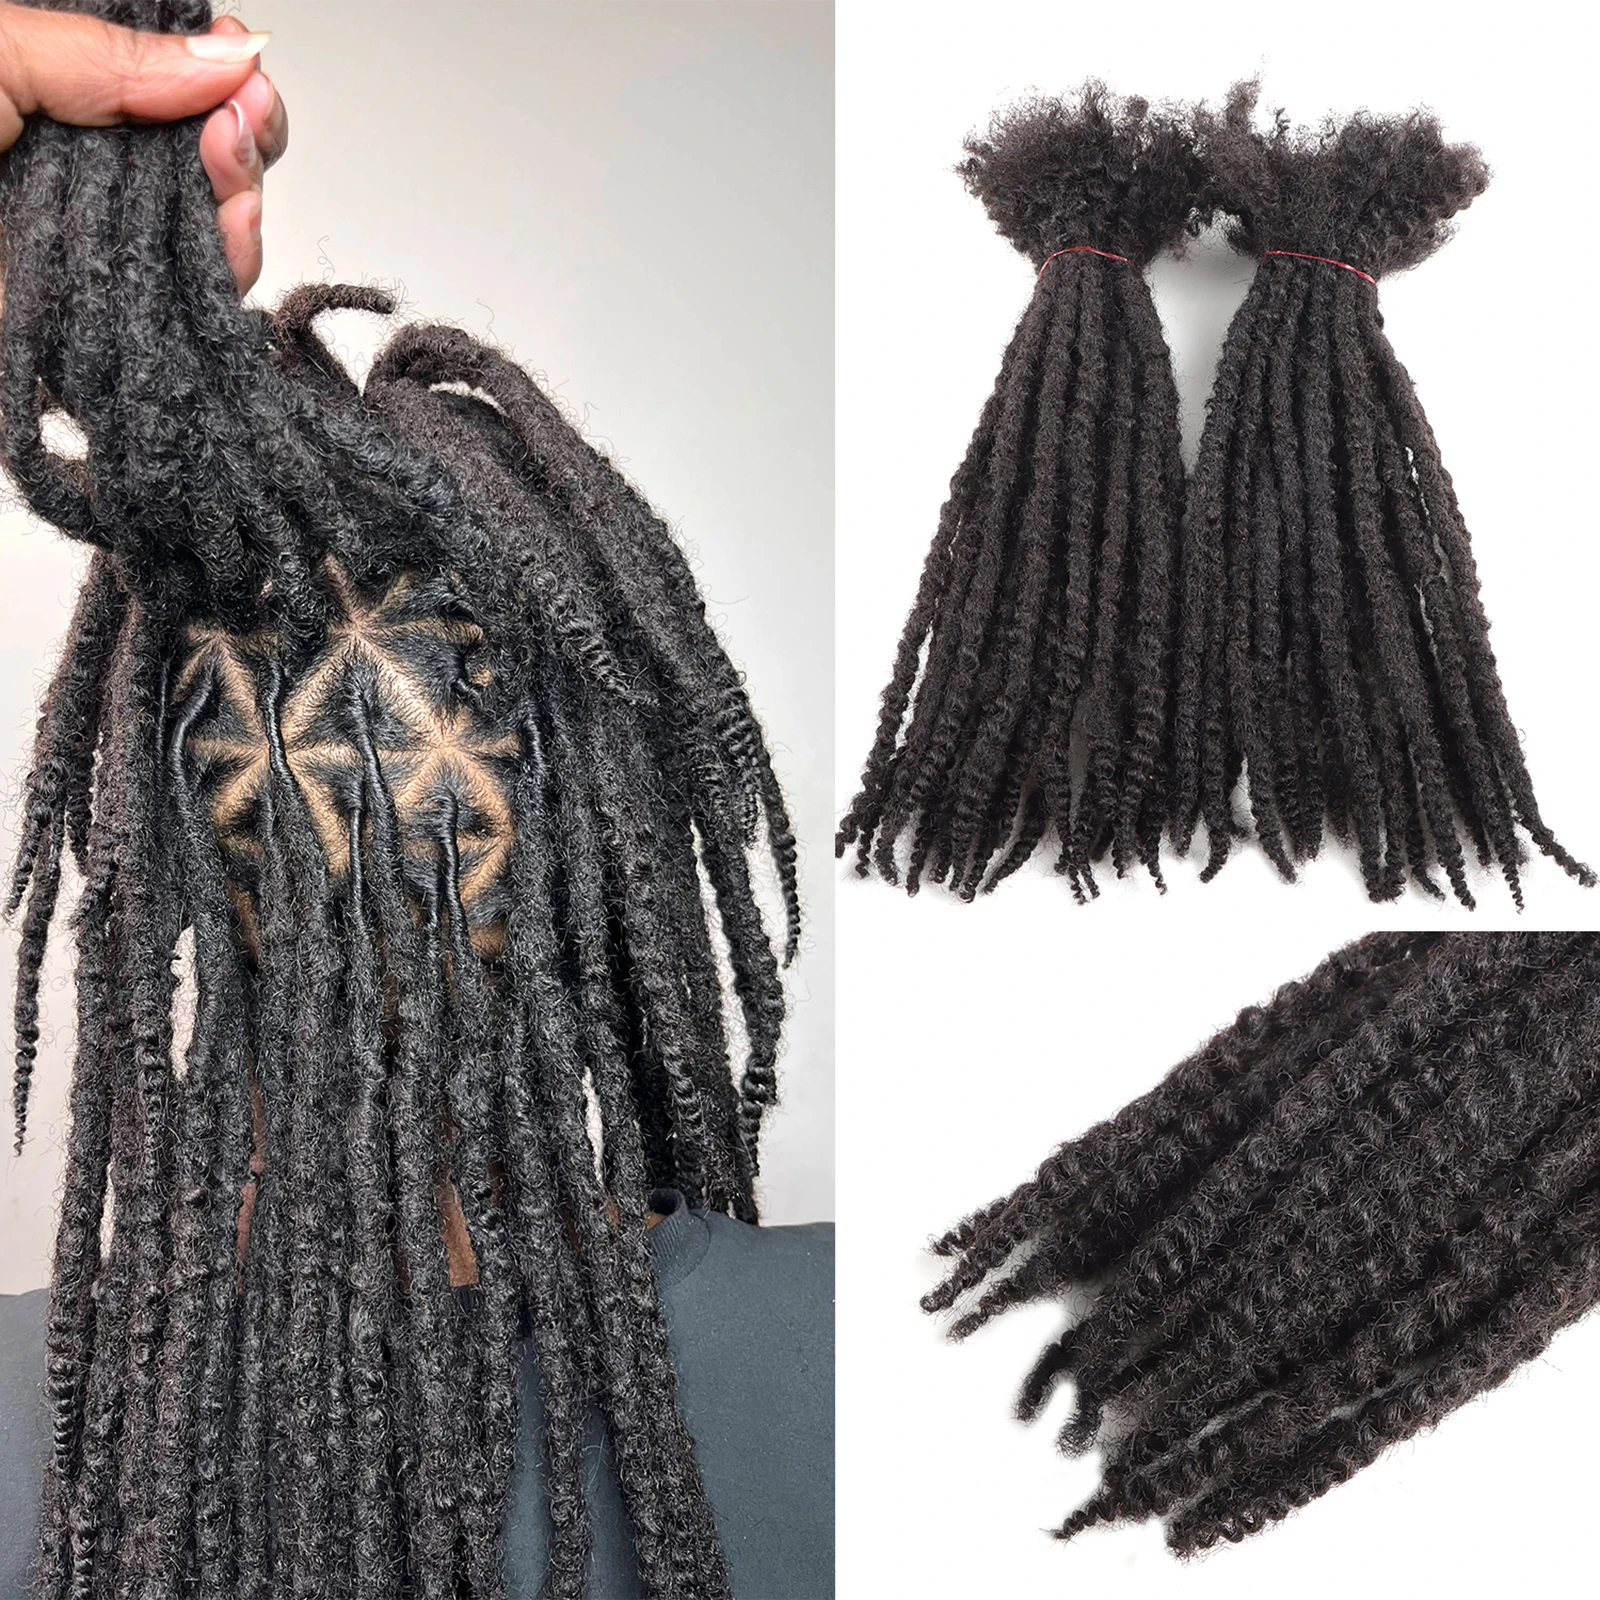 Textured Coiled Tips Curly Ends Locs 20strands one pack natrual soft locs loc extensions human hair curly ends locsanity